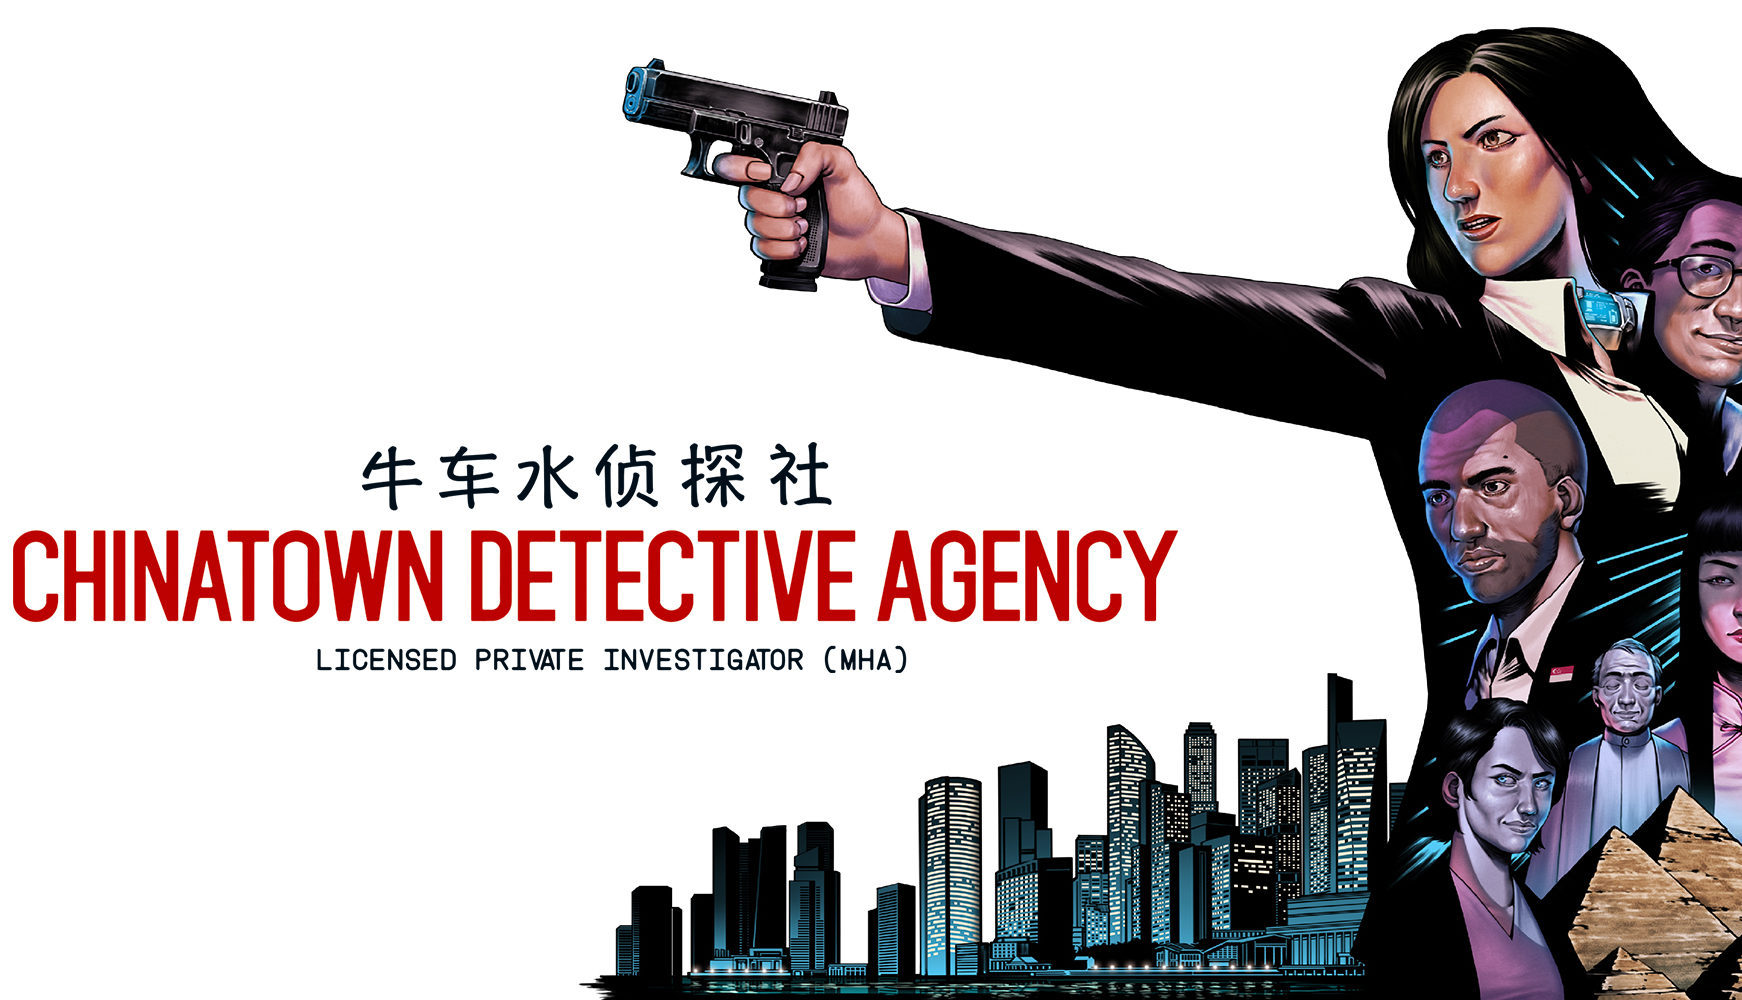 Chinatown Detective Agency Game Localization French français localization alexis barroso